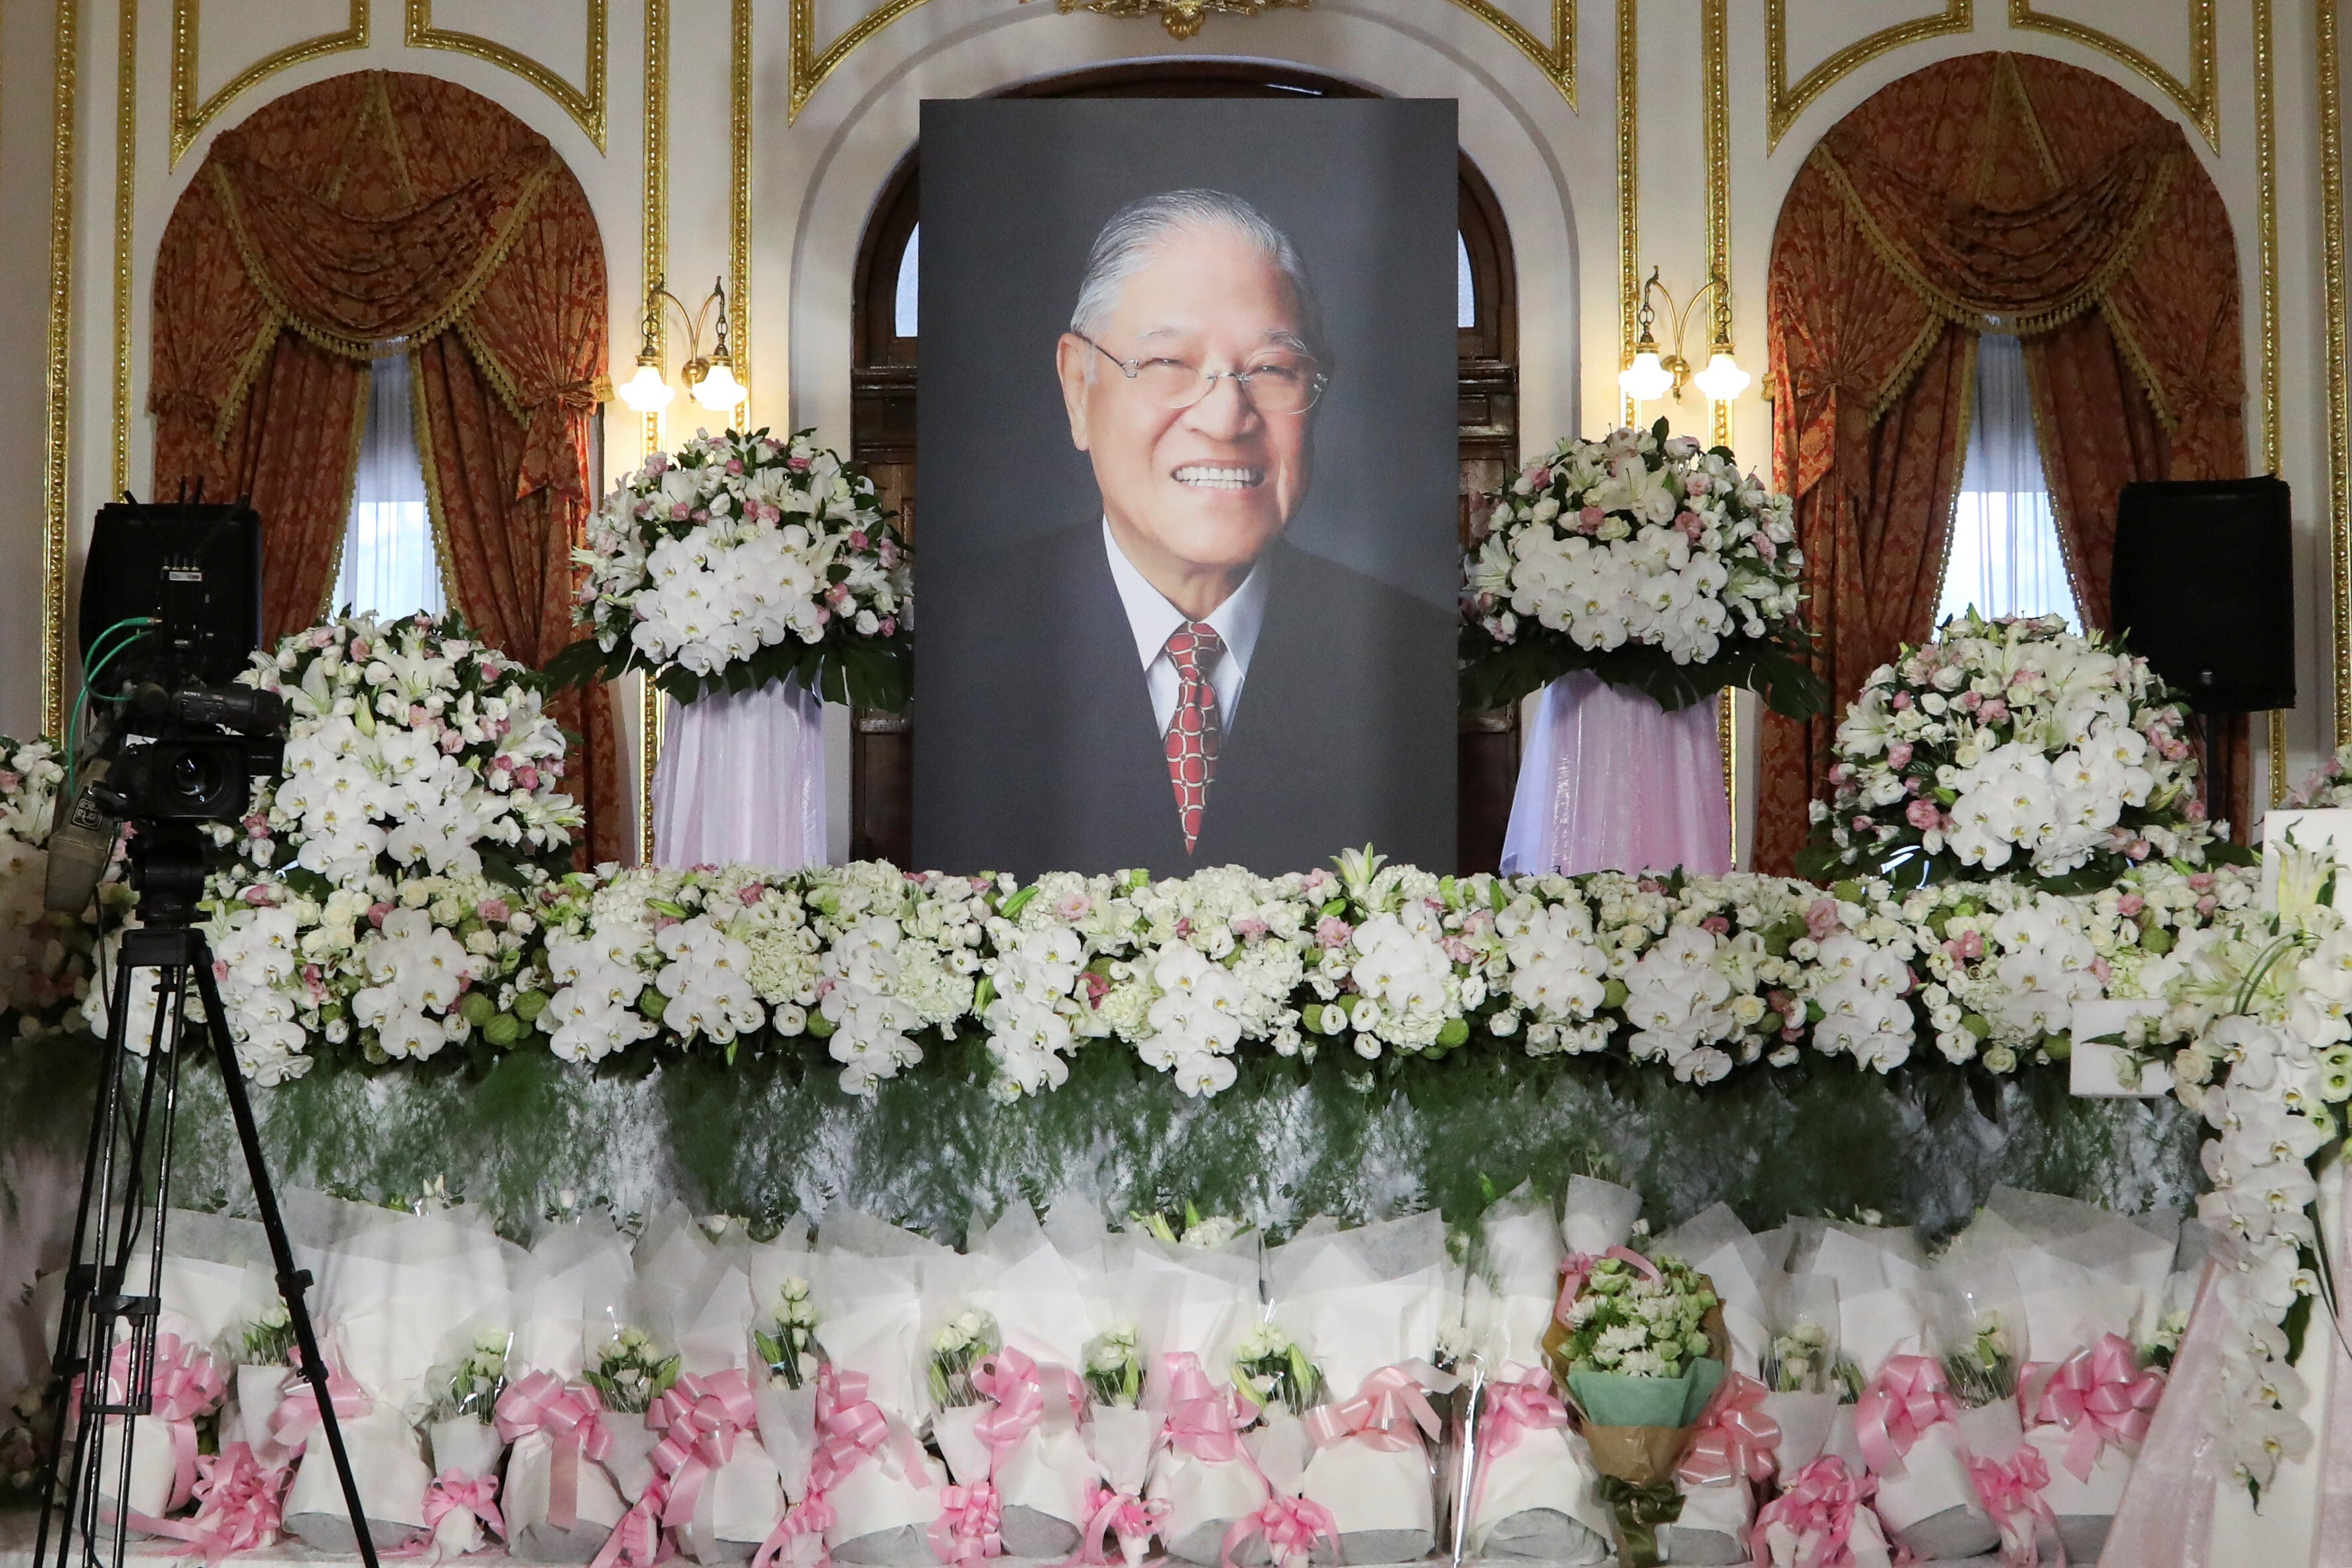 Former Taiwanese president Lee Teng-hui cremated after symbolic final tour  | South China Morning Post